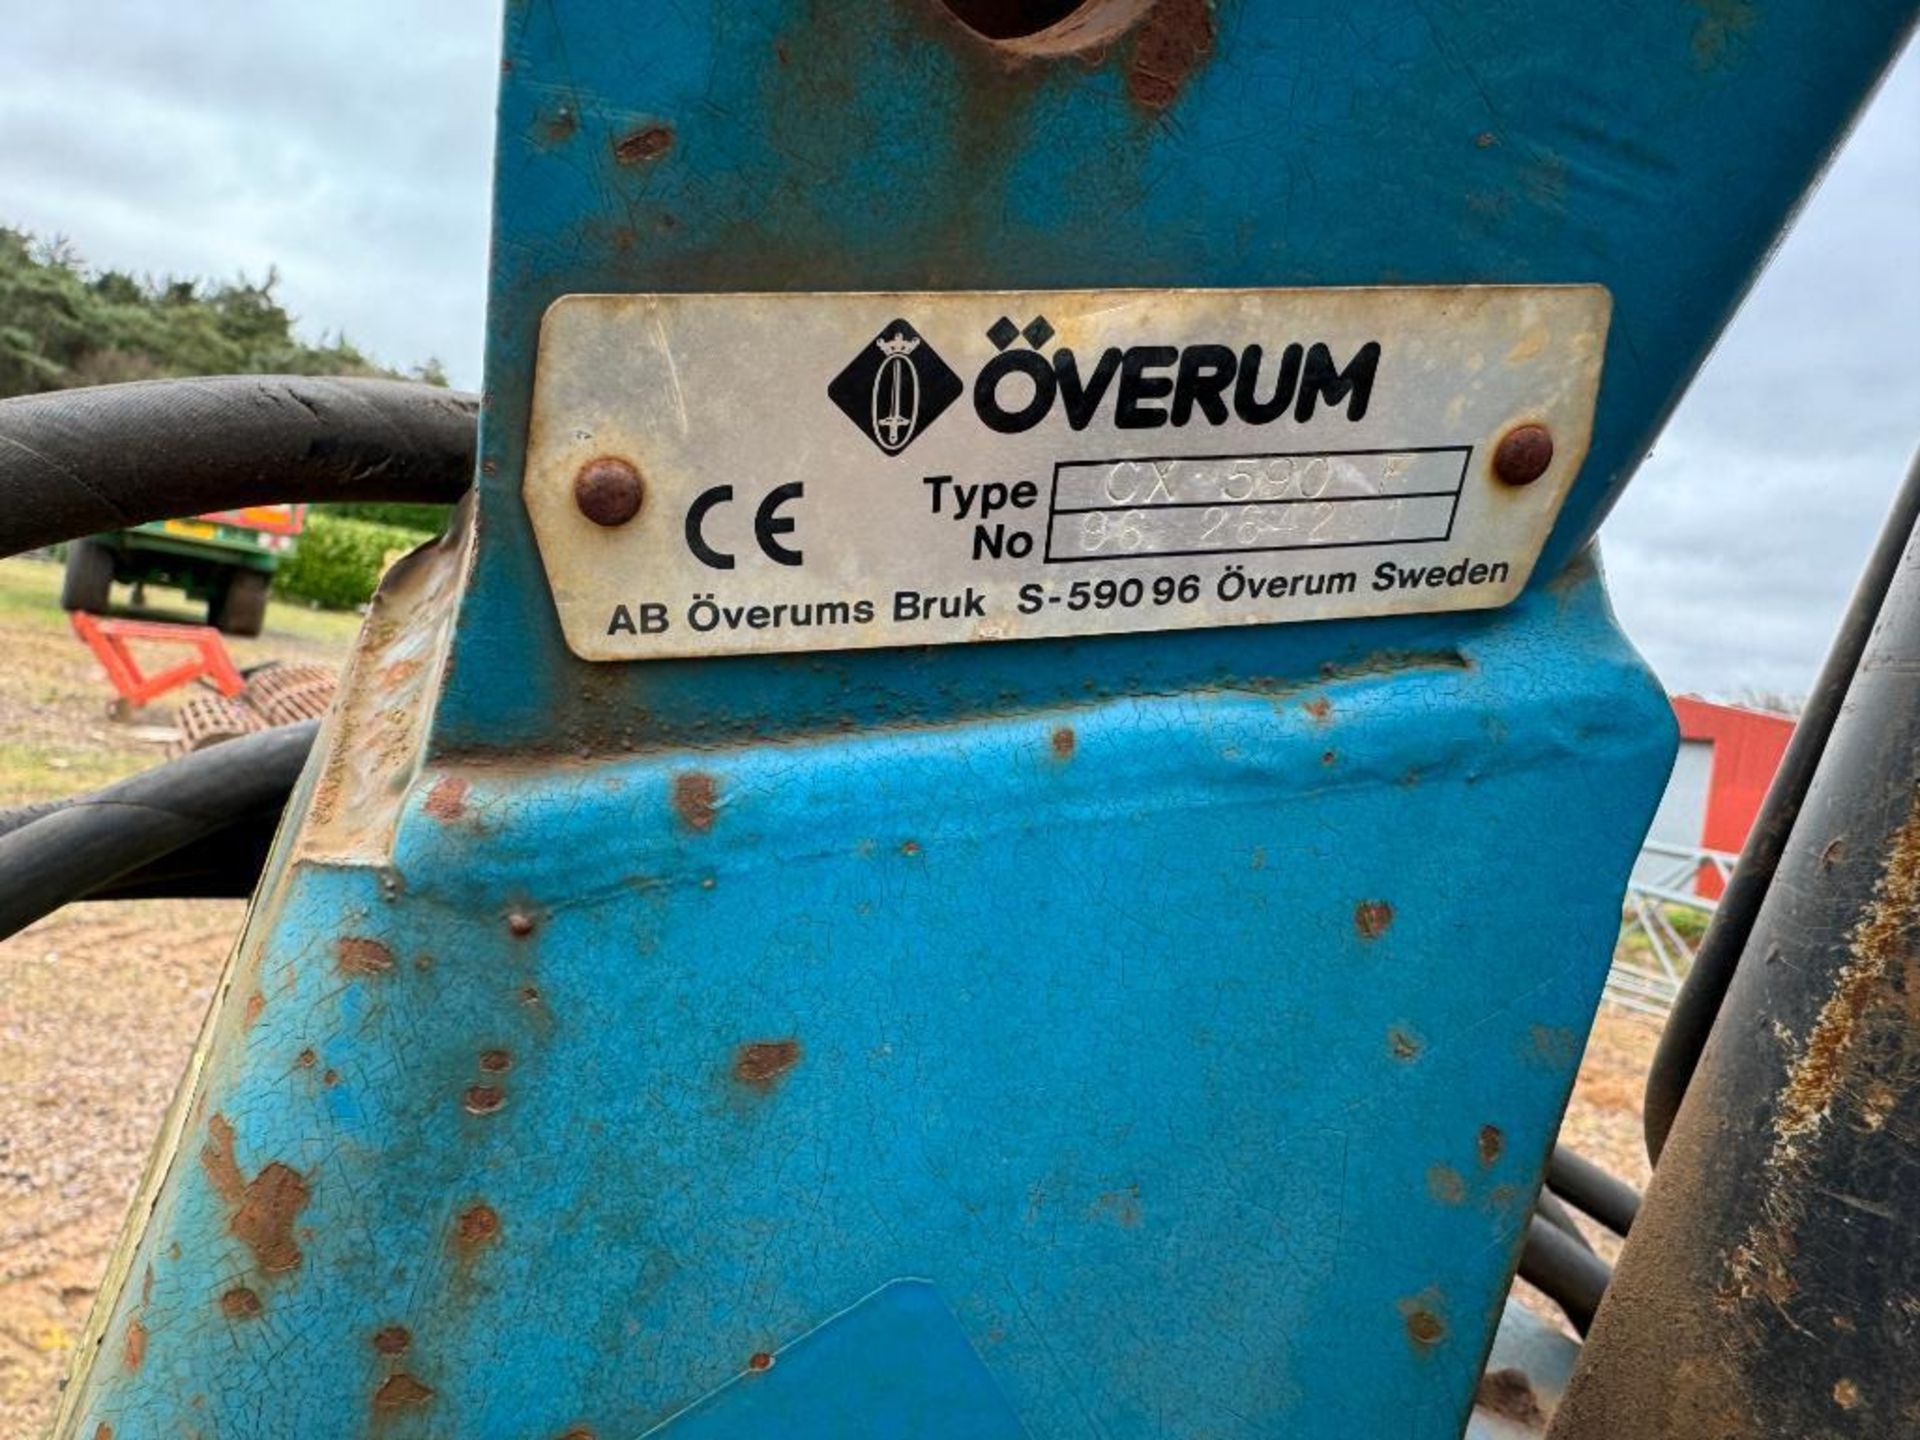 Overum CX590F 5f reversible plough with skimmers, hydraulic vari-width. Serial No: 96 264201 - Image 7 of 9